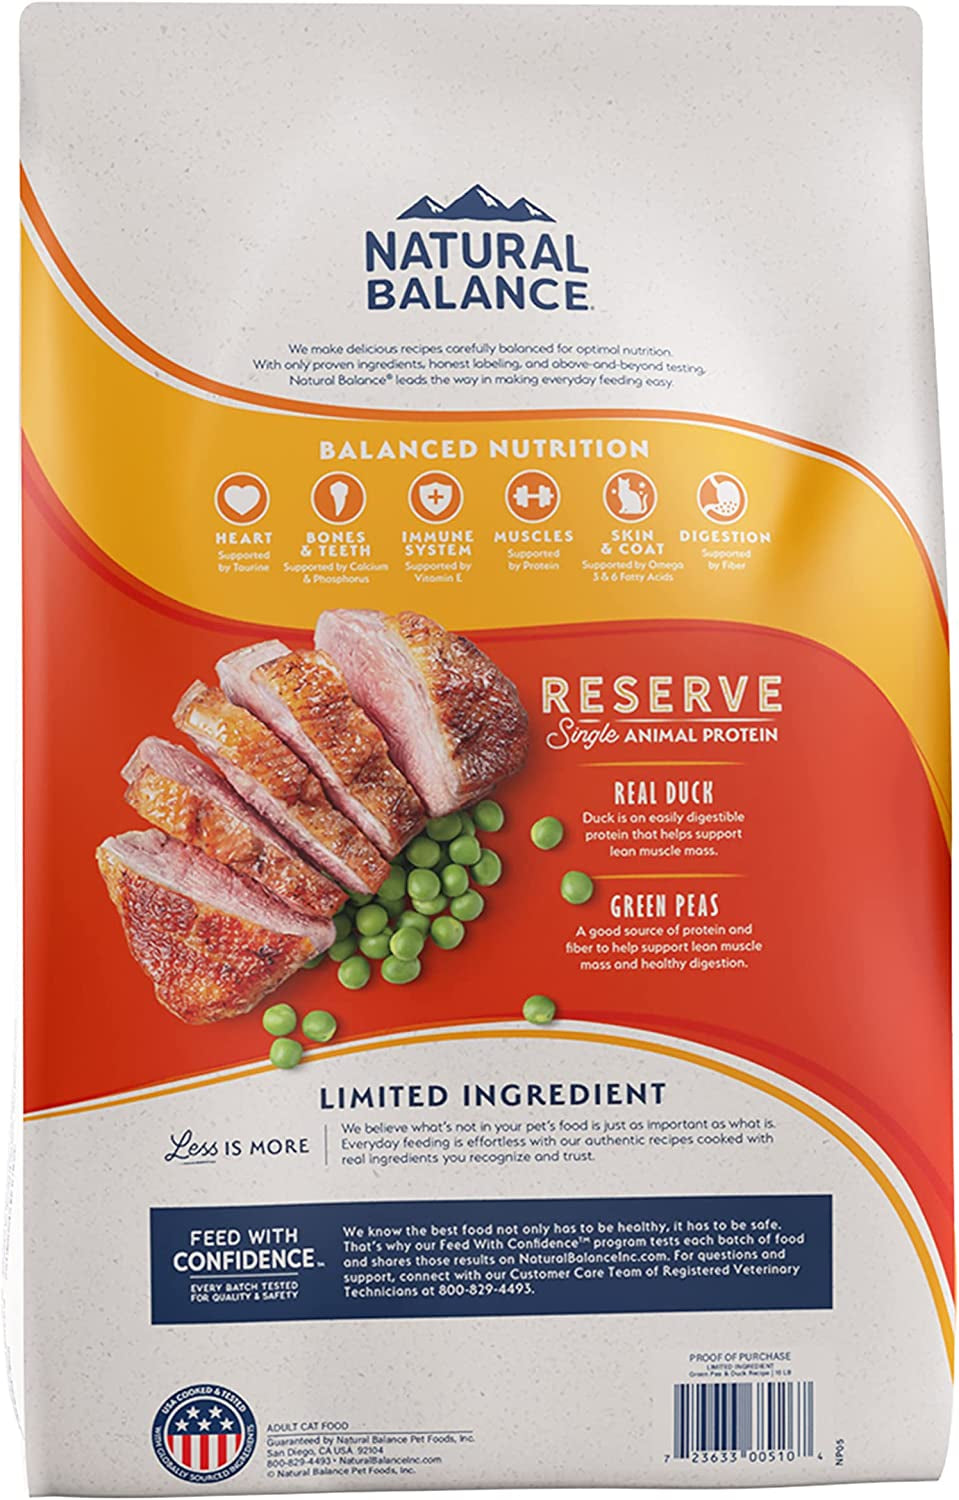 Natural Balance Limited Ingredient Adult Grain-Free Dry Cat Food, Duck & Green Pea Recipe, 10 Pound (Pack of 1)